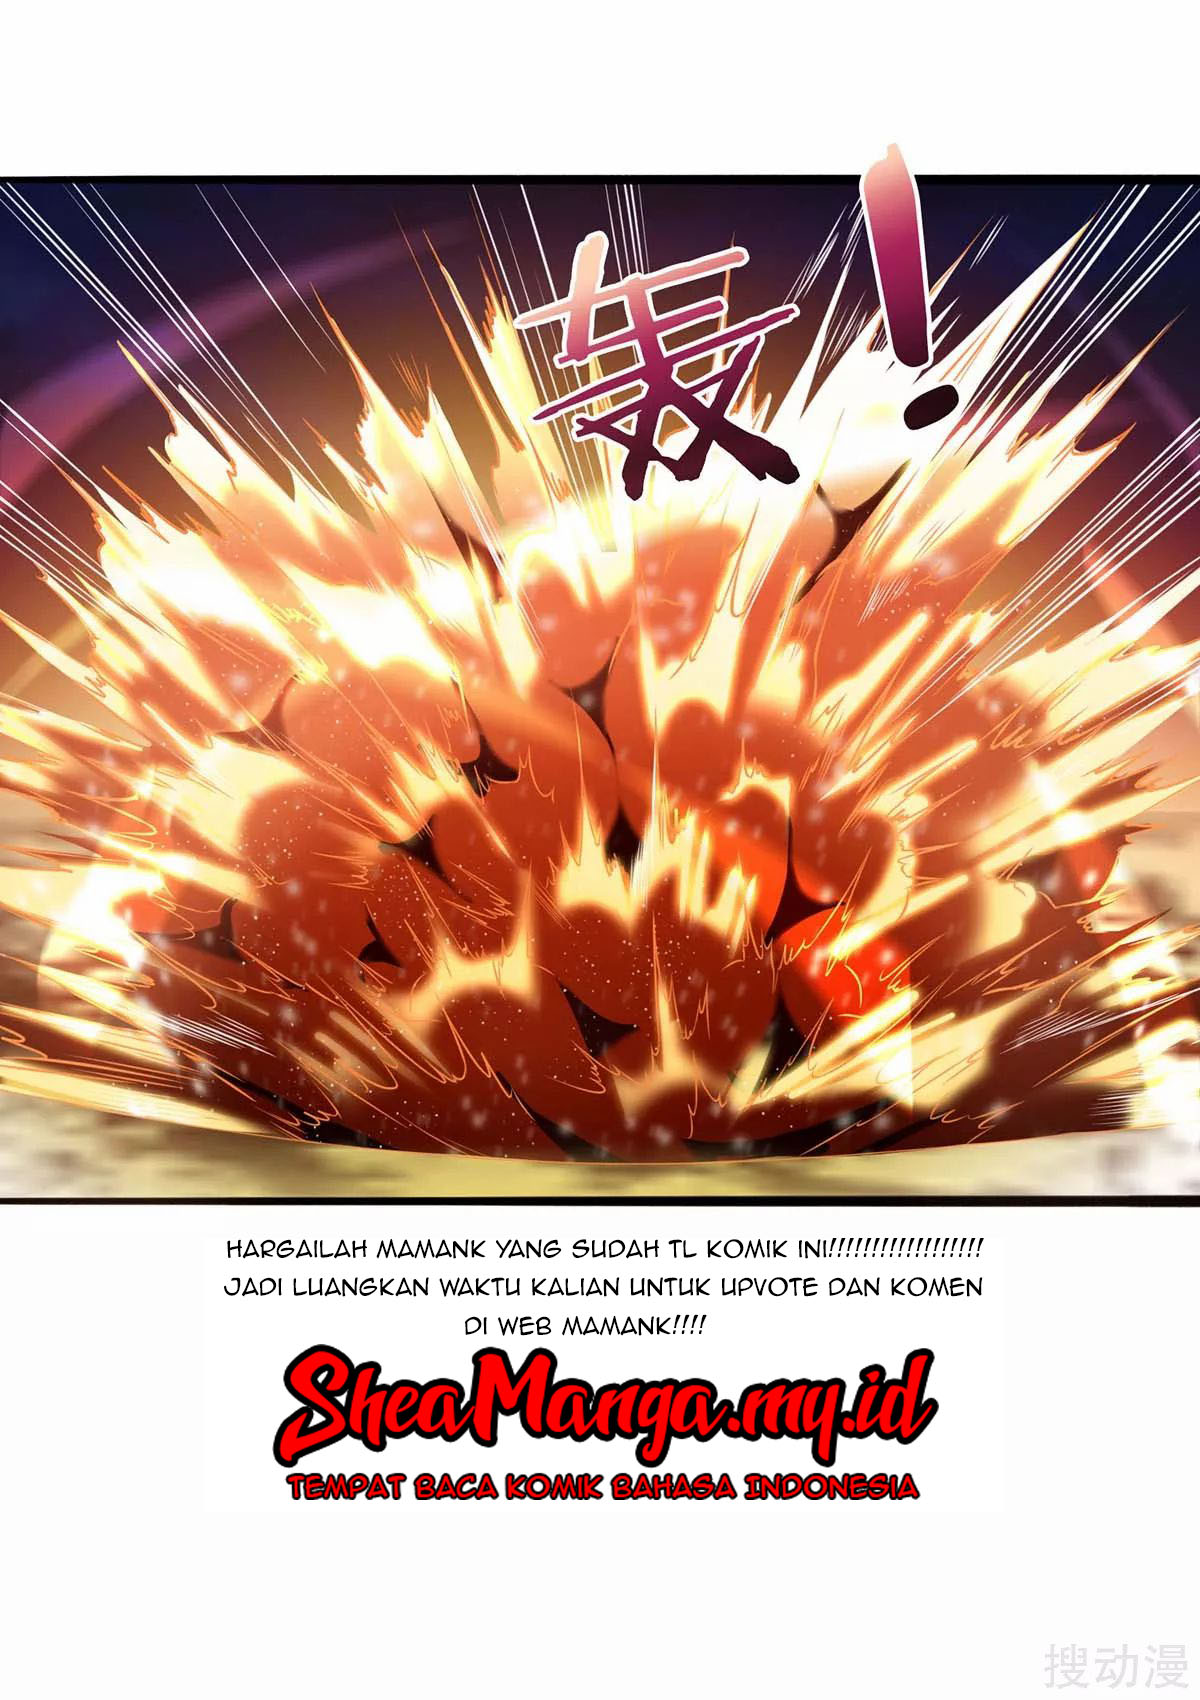 Strongest Leveling Chapter 142